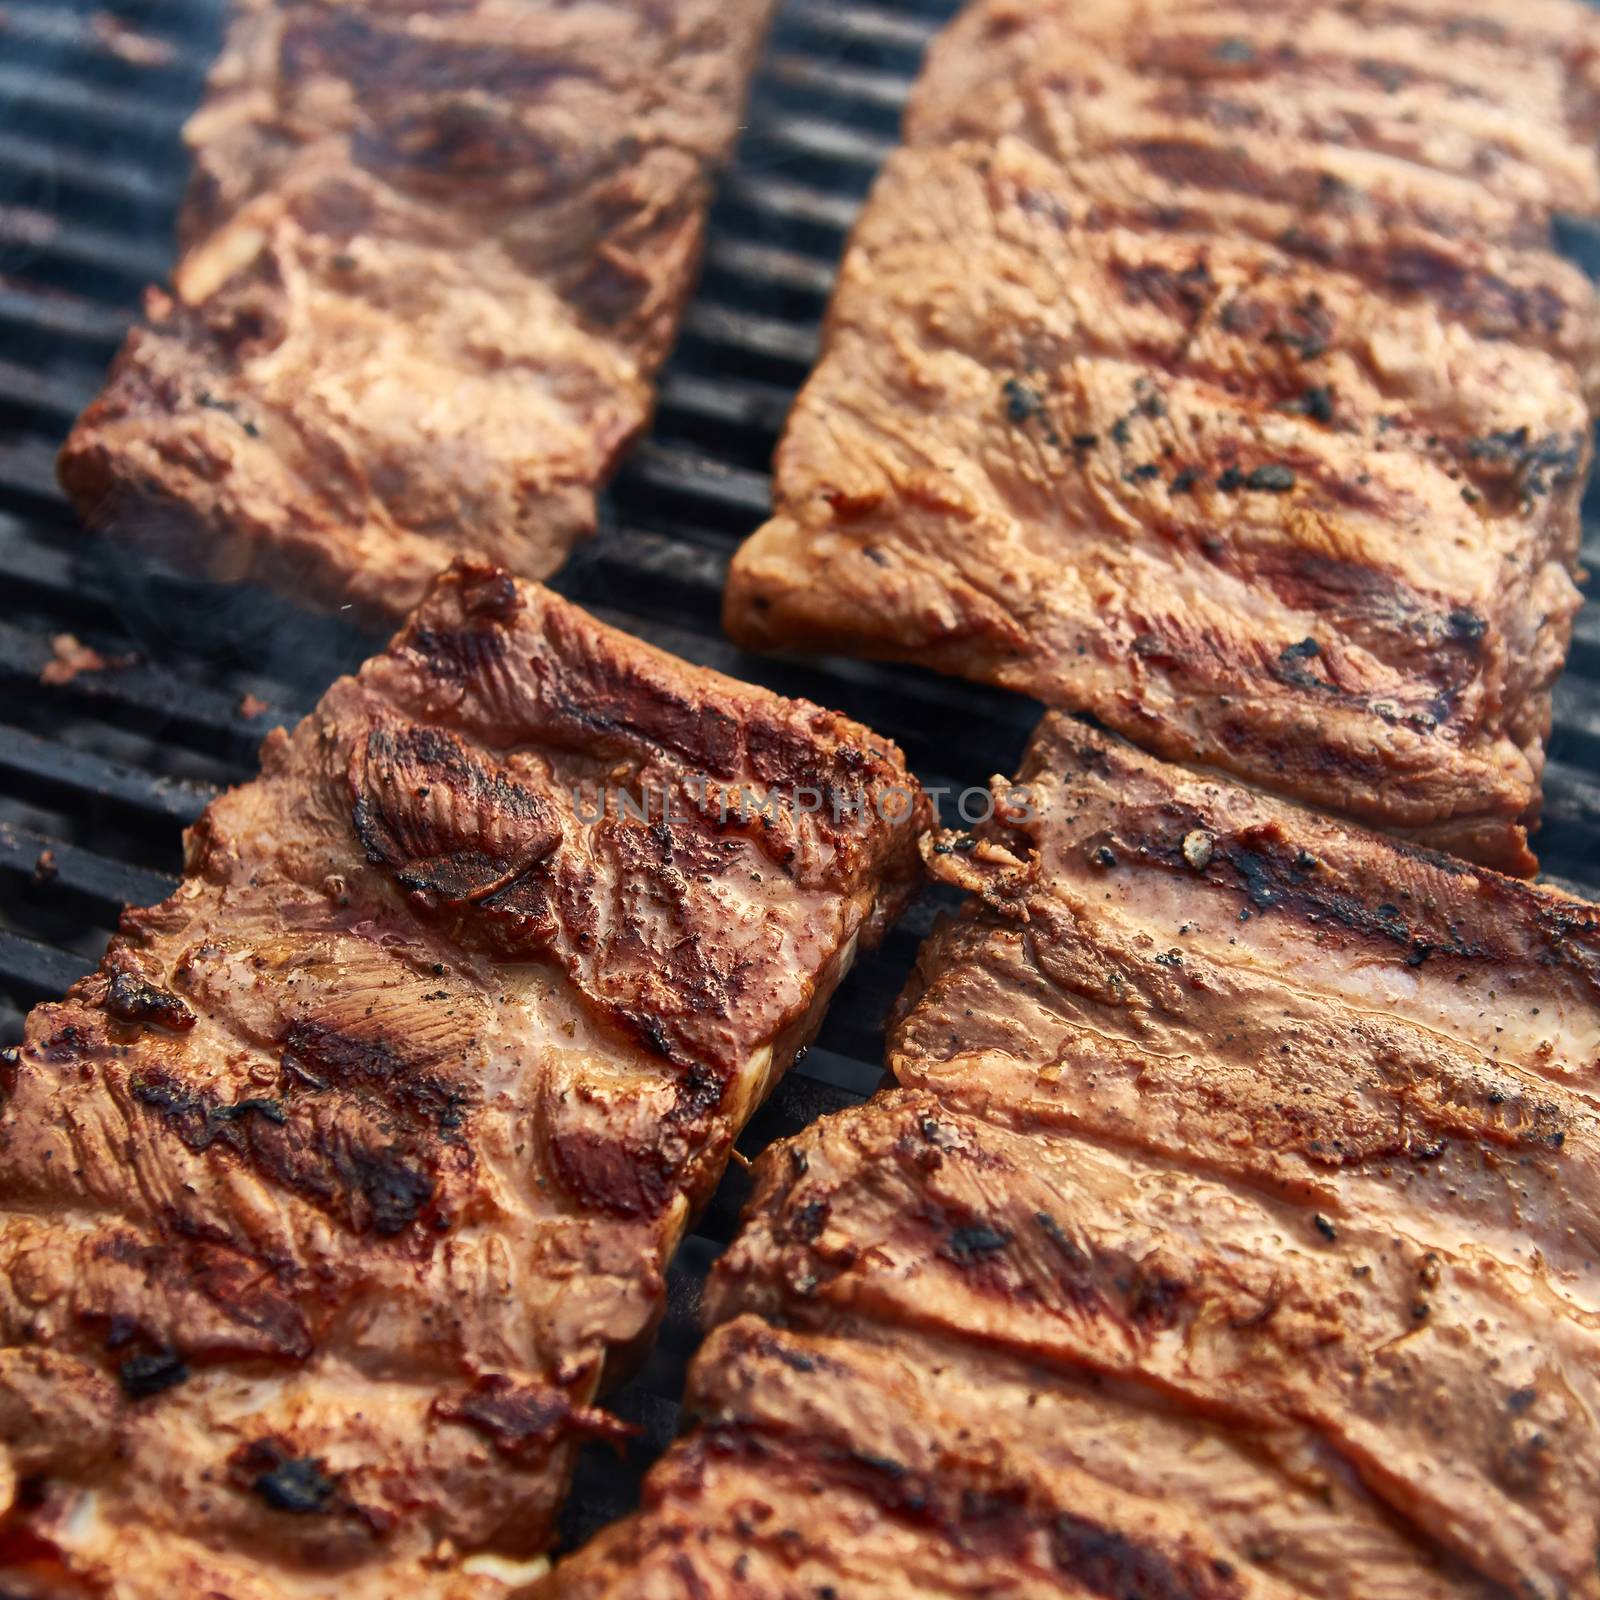 Grilled pork ribs on the grill. Shallow dof